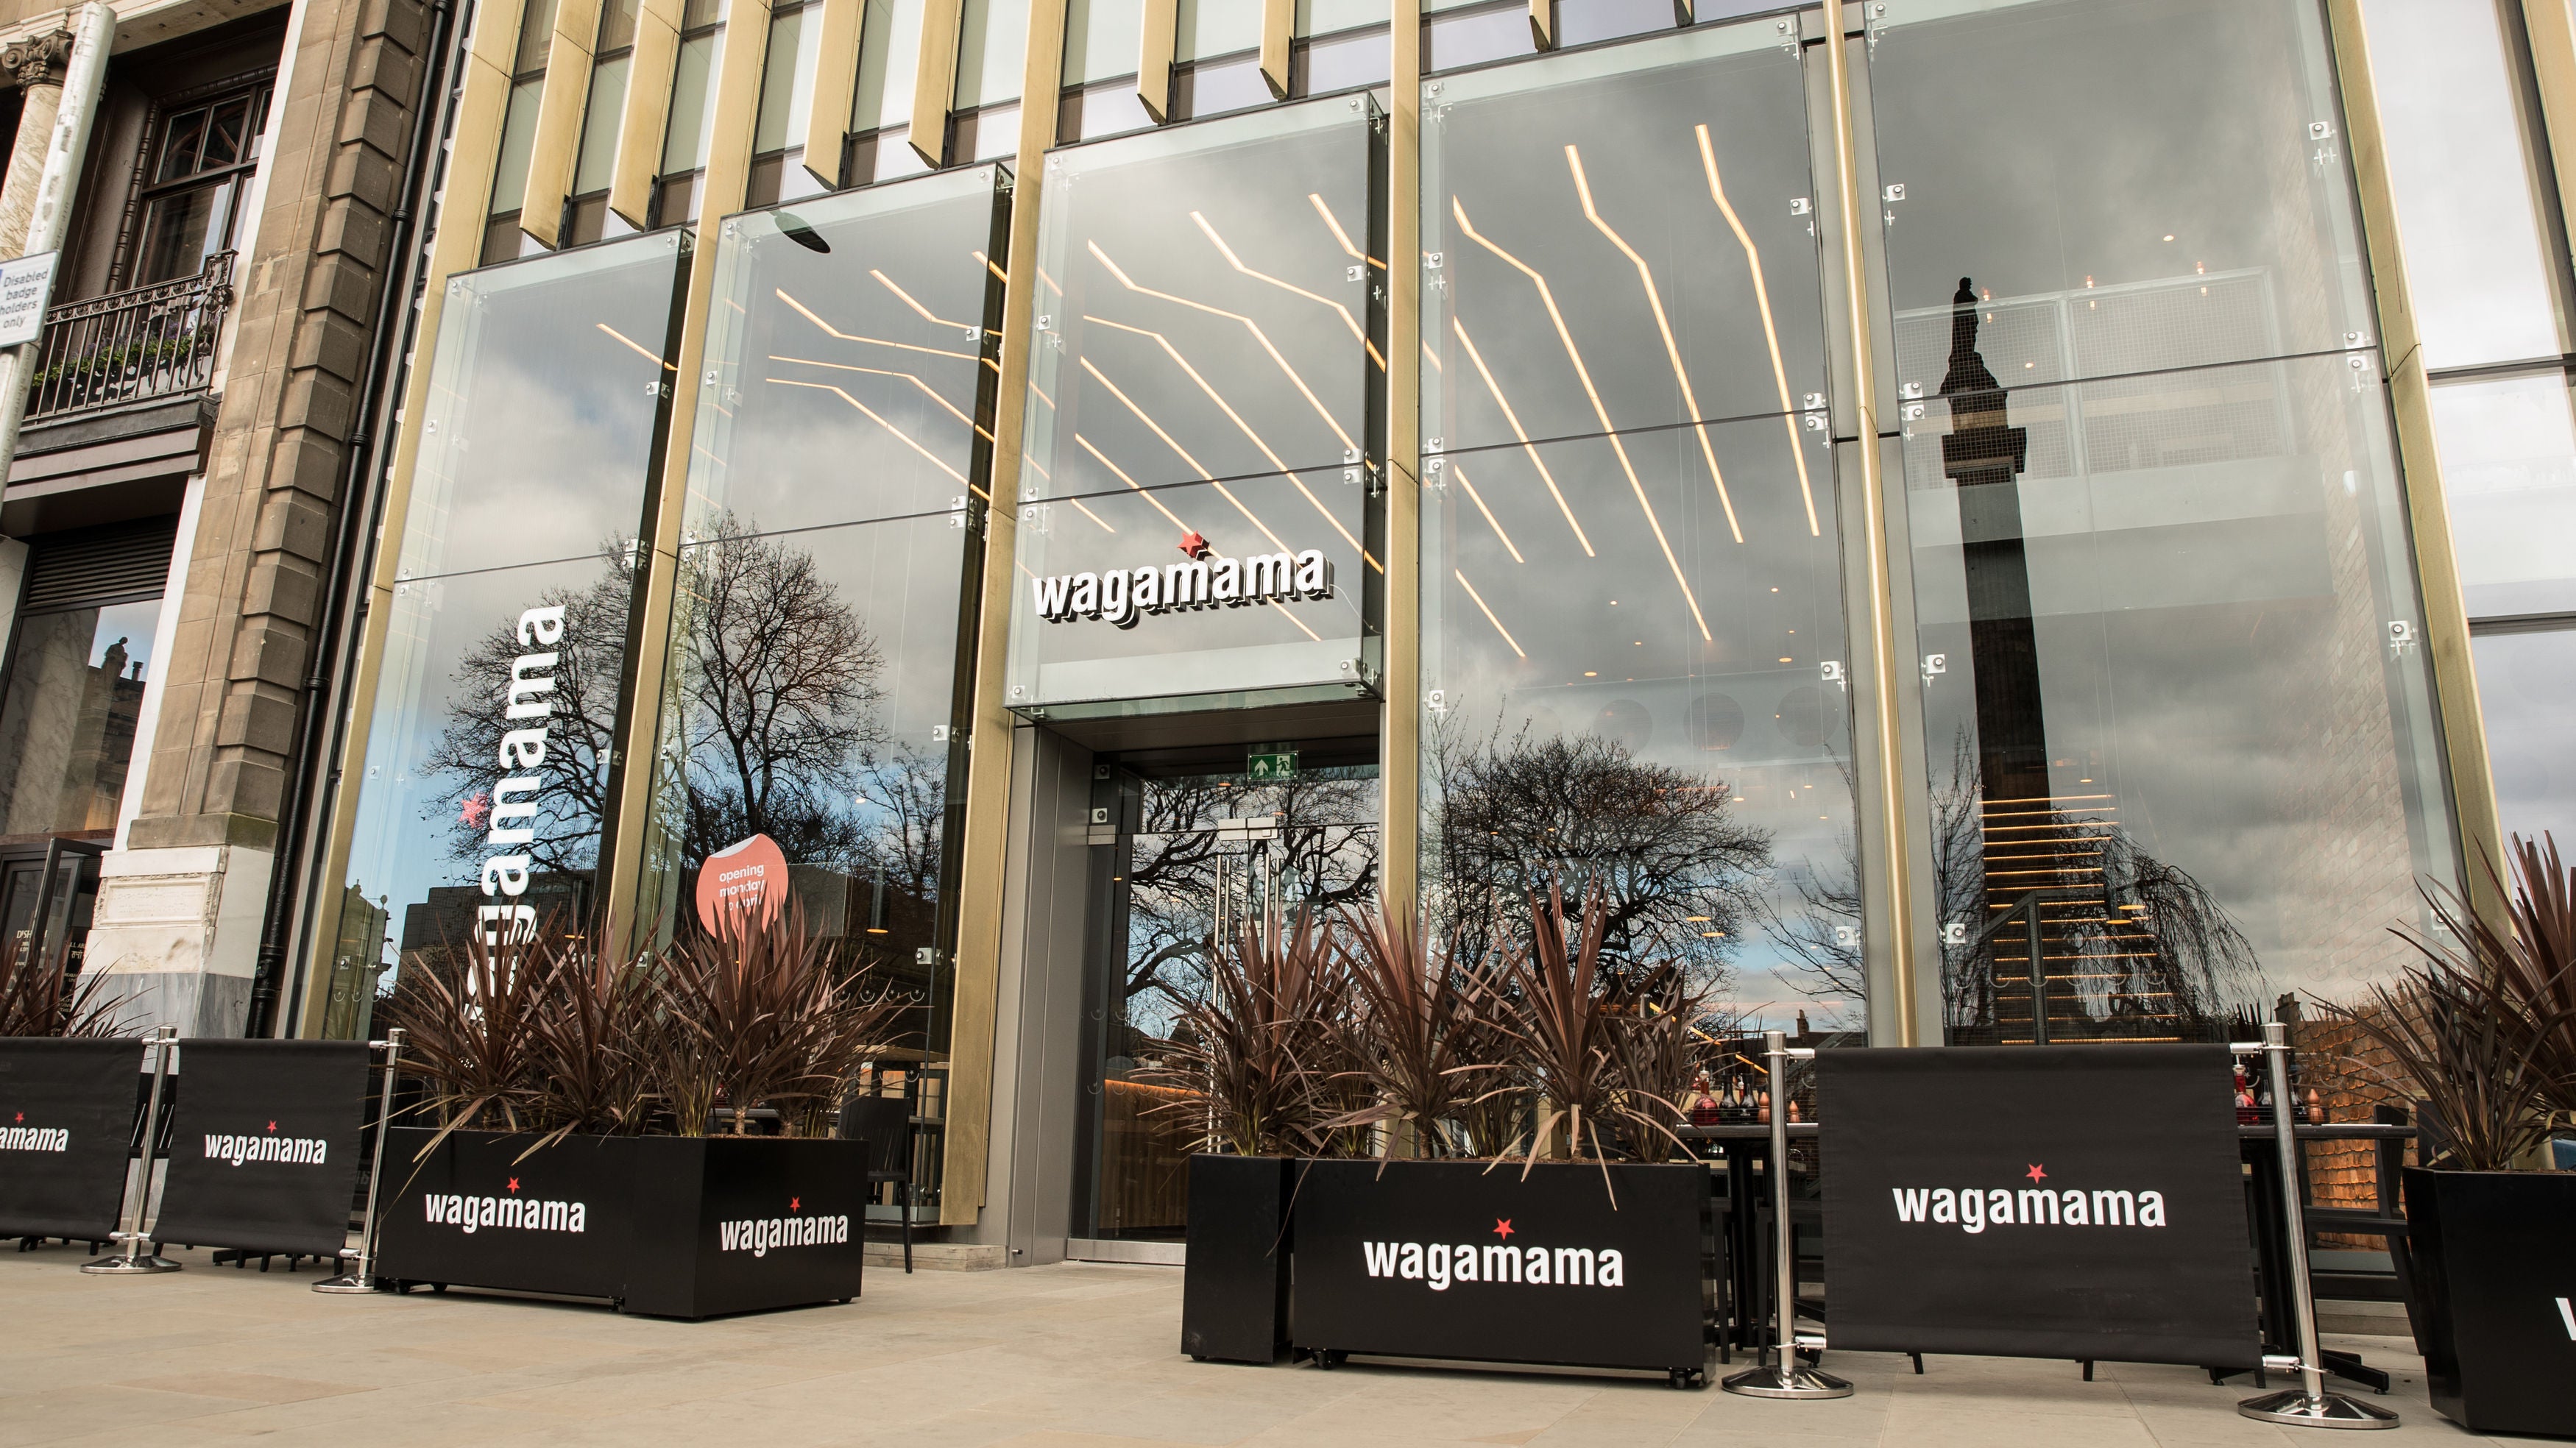 Wagamama owner The Restaurant Group’s shares moved lower. The firm is expecting to see higher costs persist, raising profitability concerns (Wagamama/PA)